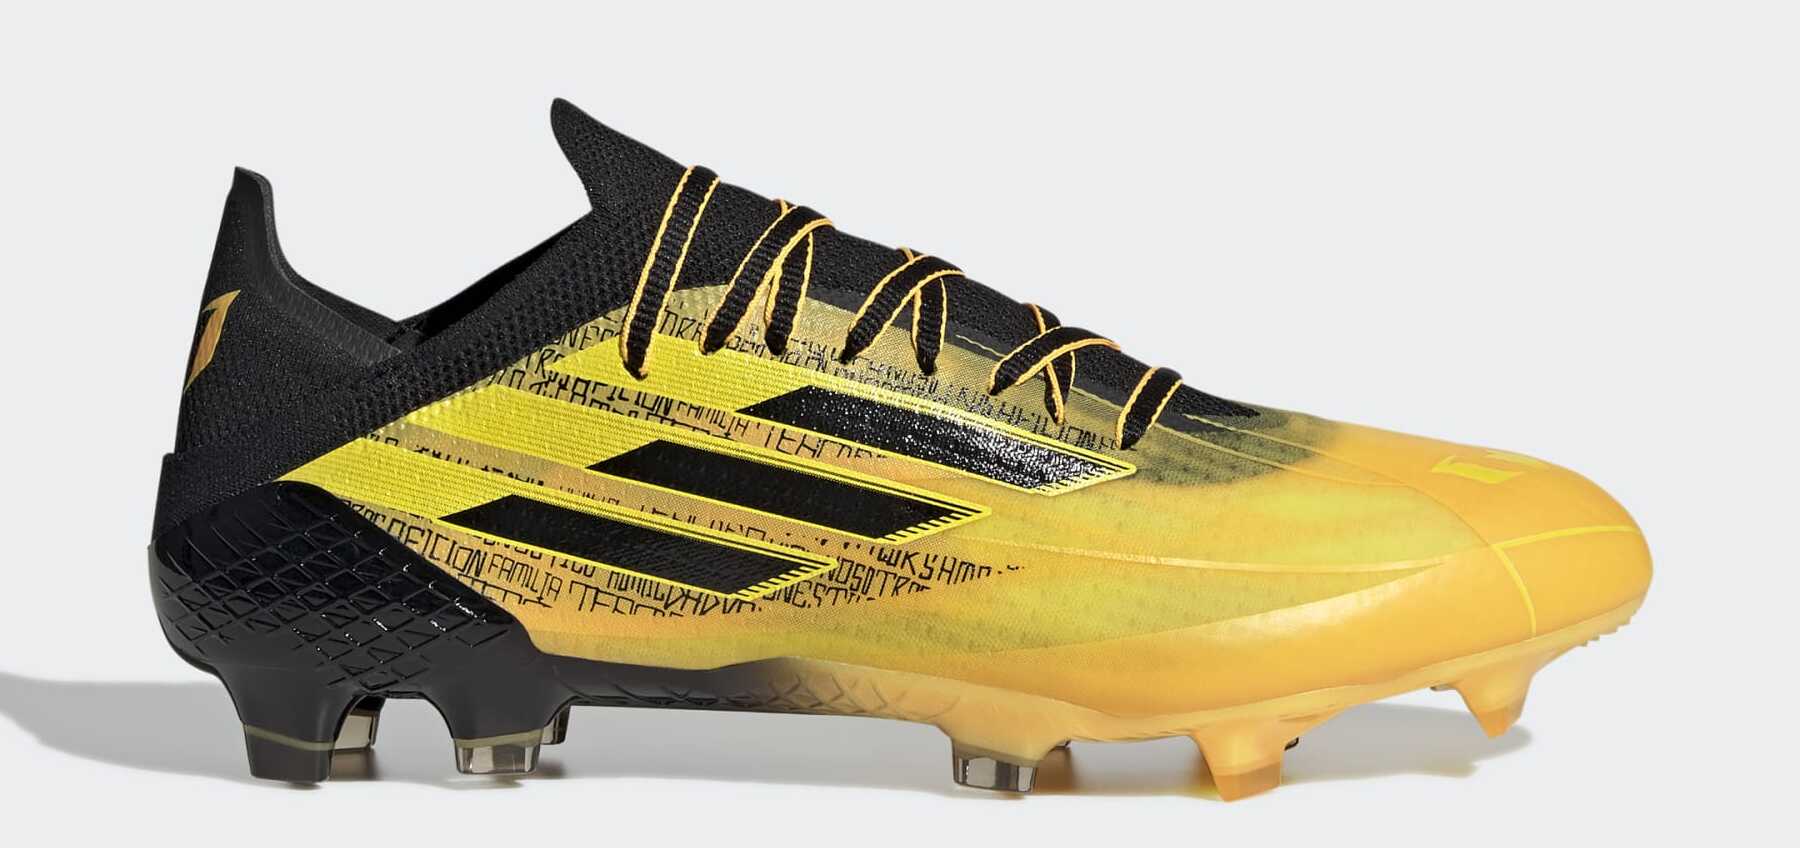 messi 2021 boots